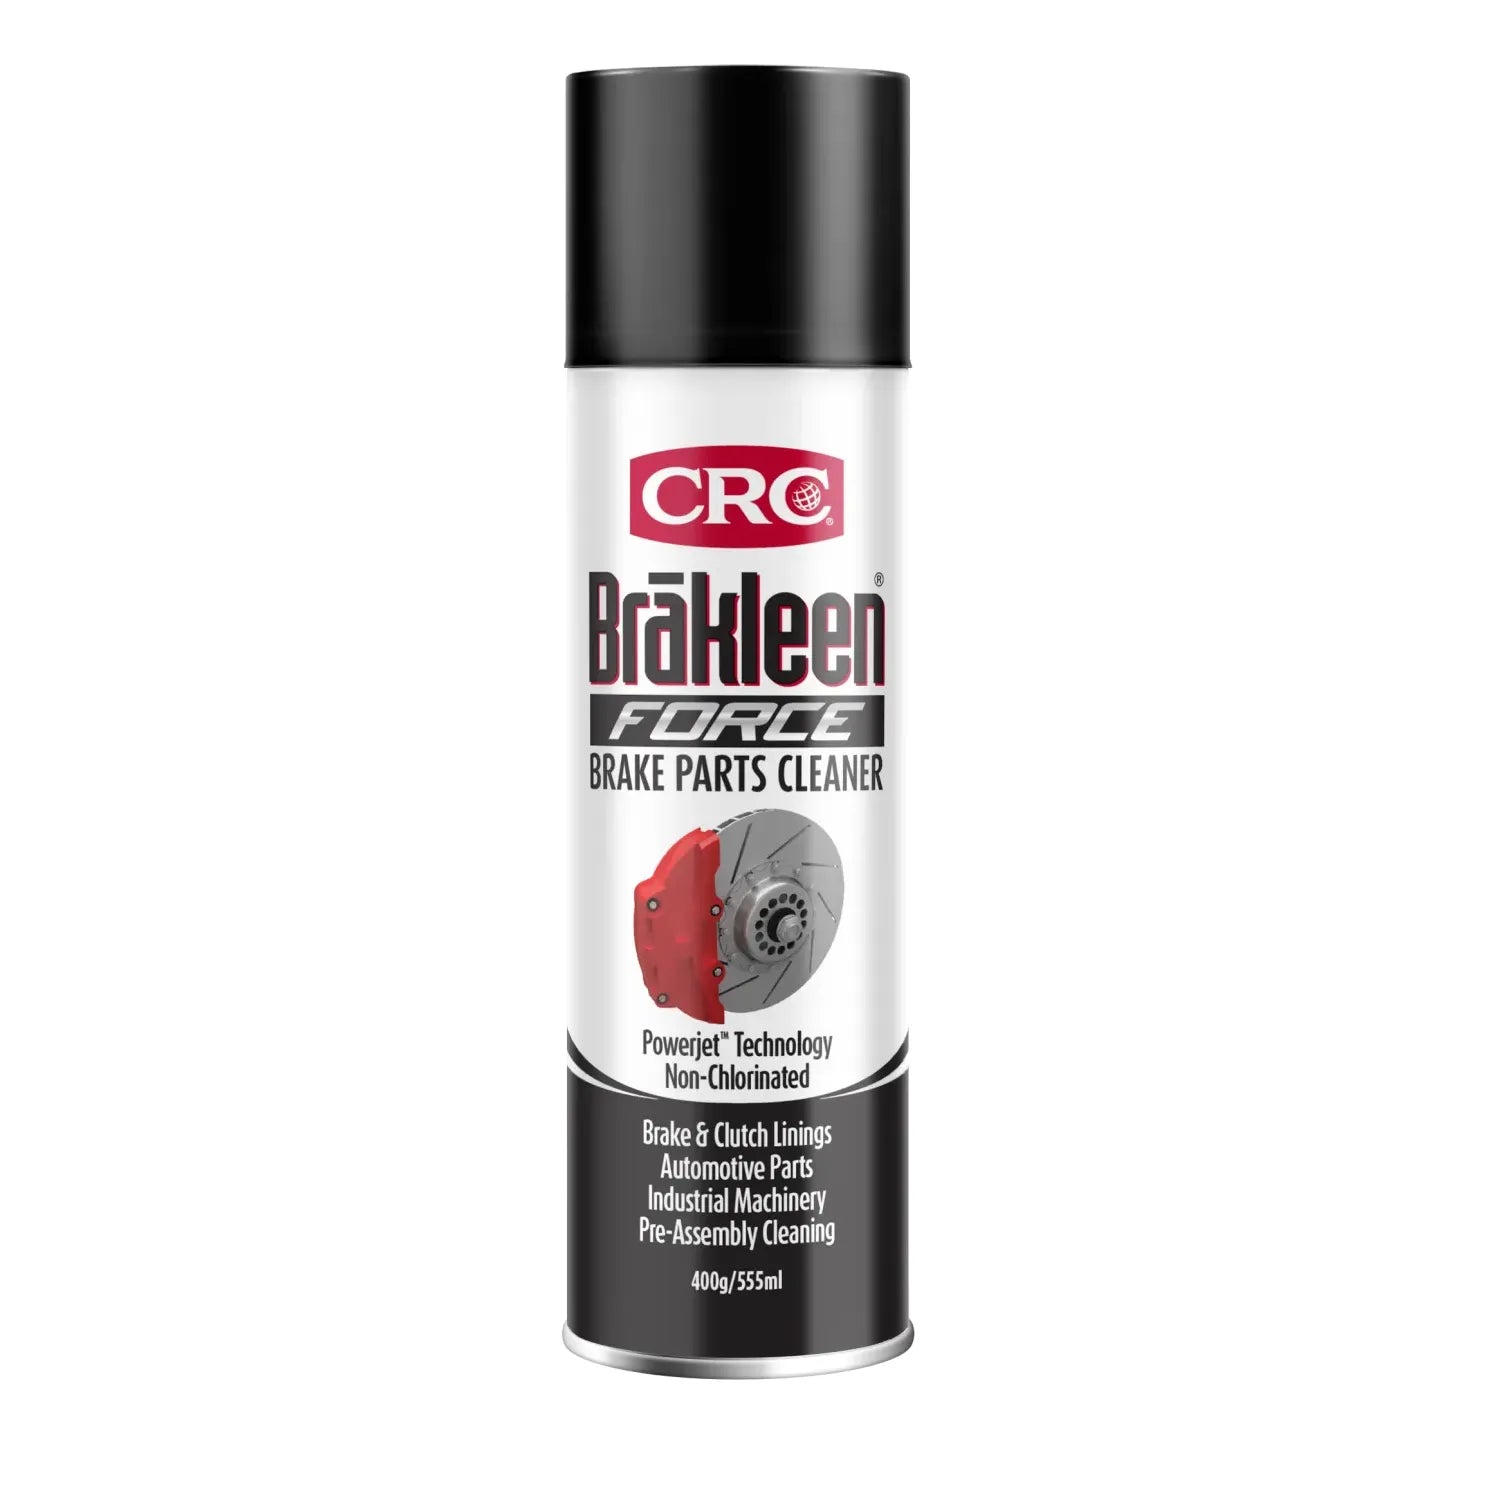 CRC Brakleen FORCE 400g | Product Code : 5085 - South East Clearance Centre